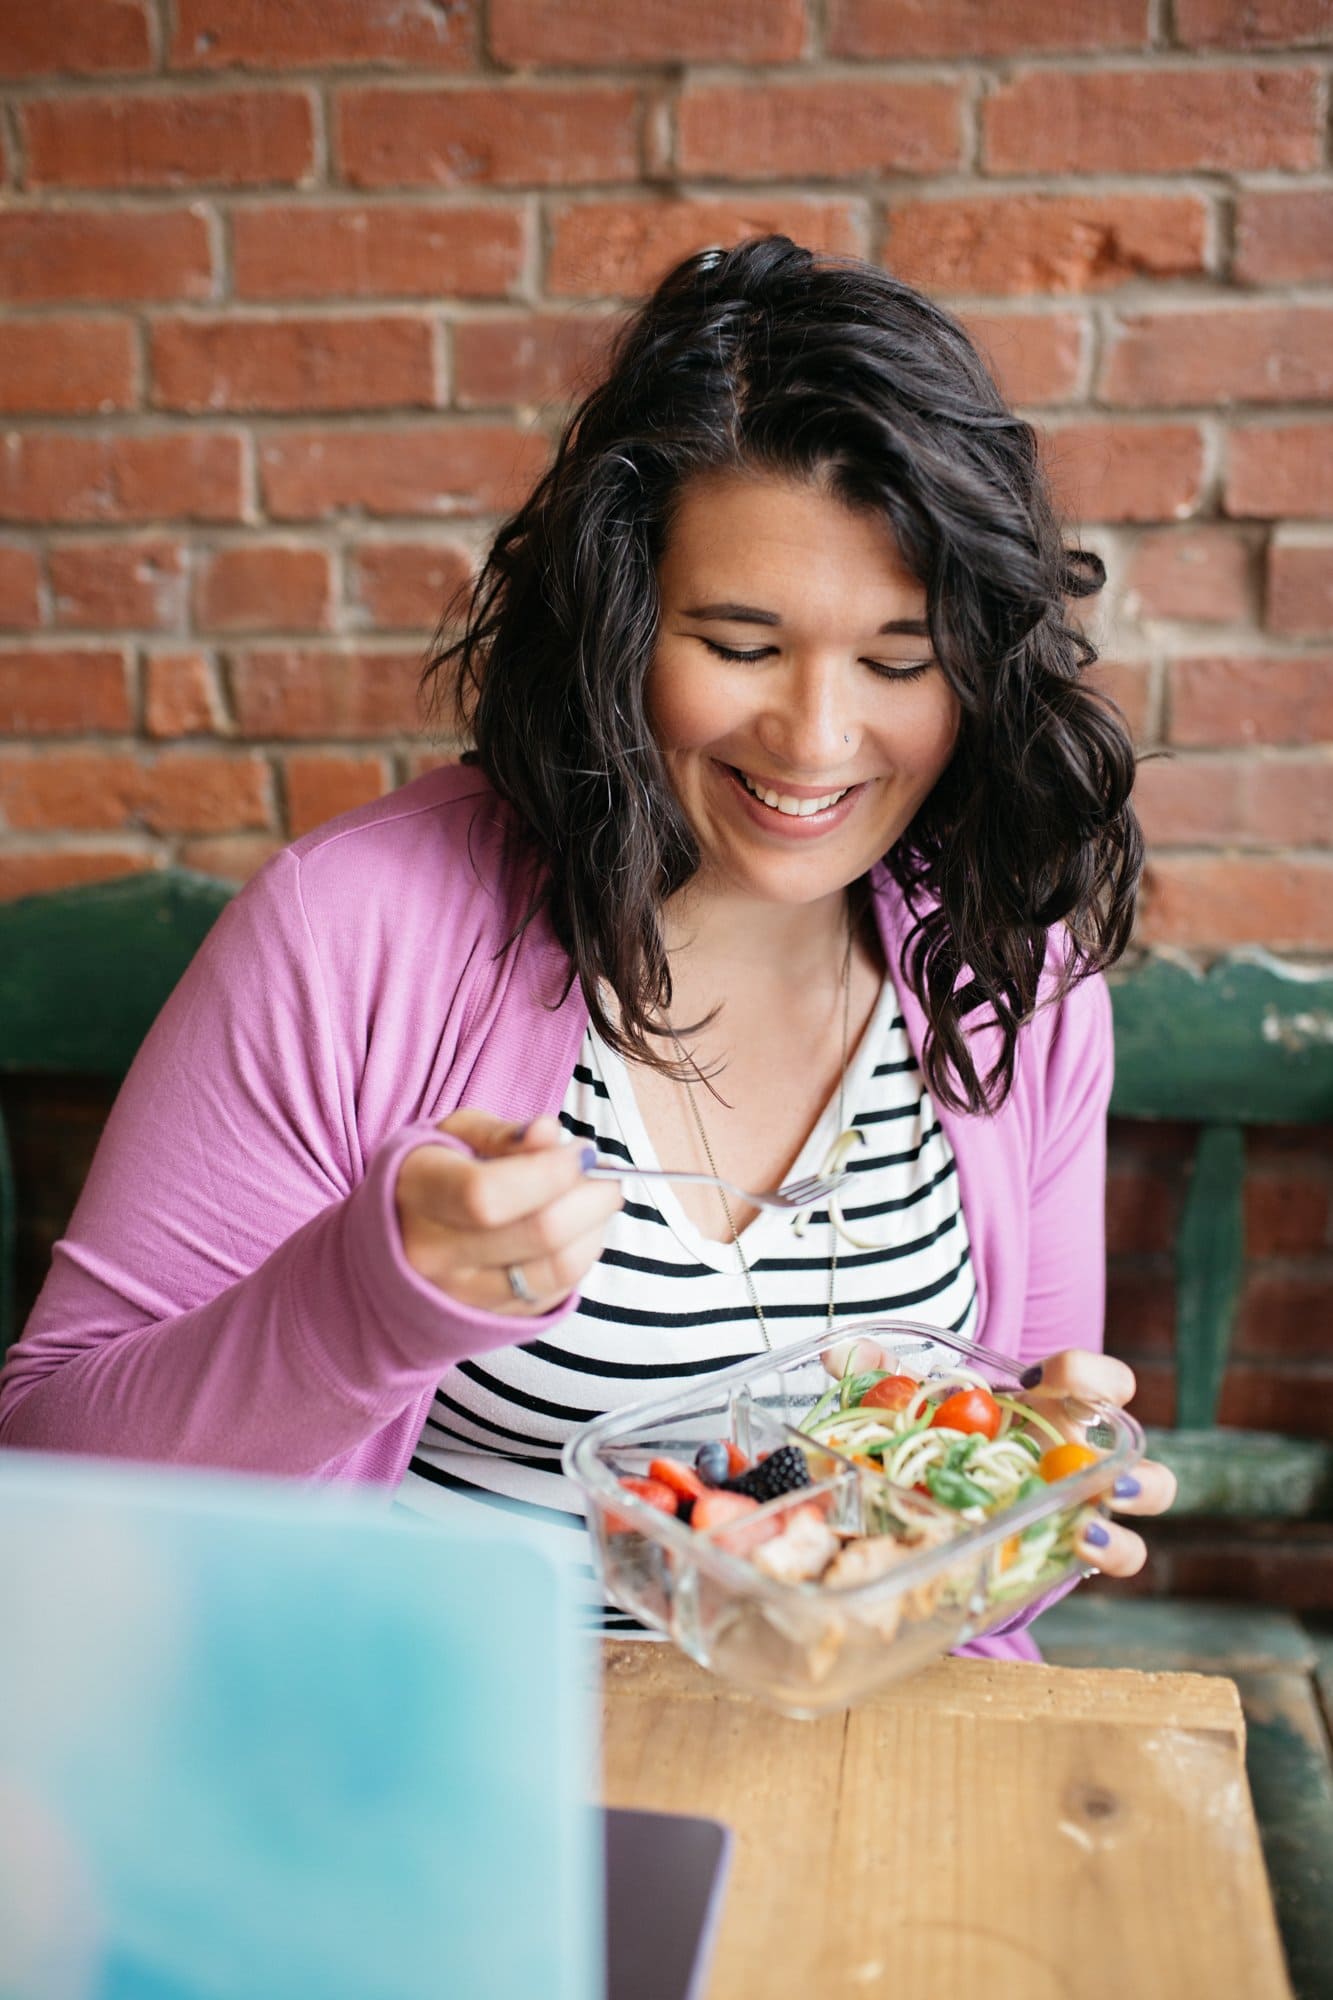 Woman in a striped shirt and purple cardigan smiling and eating vegetables, chicken, and berries out of a glass meal prep container.